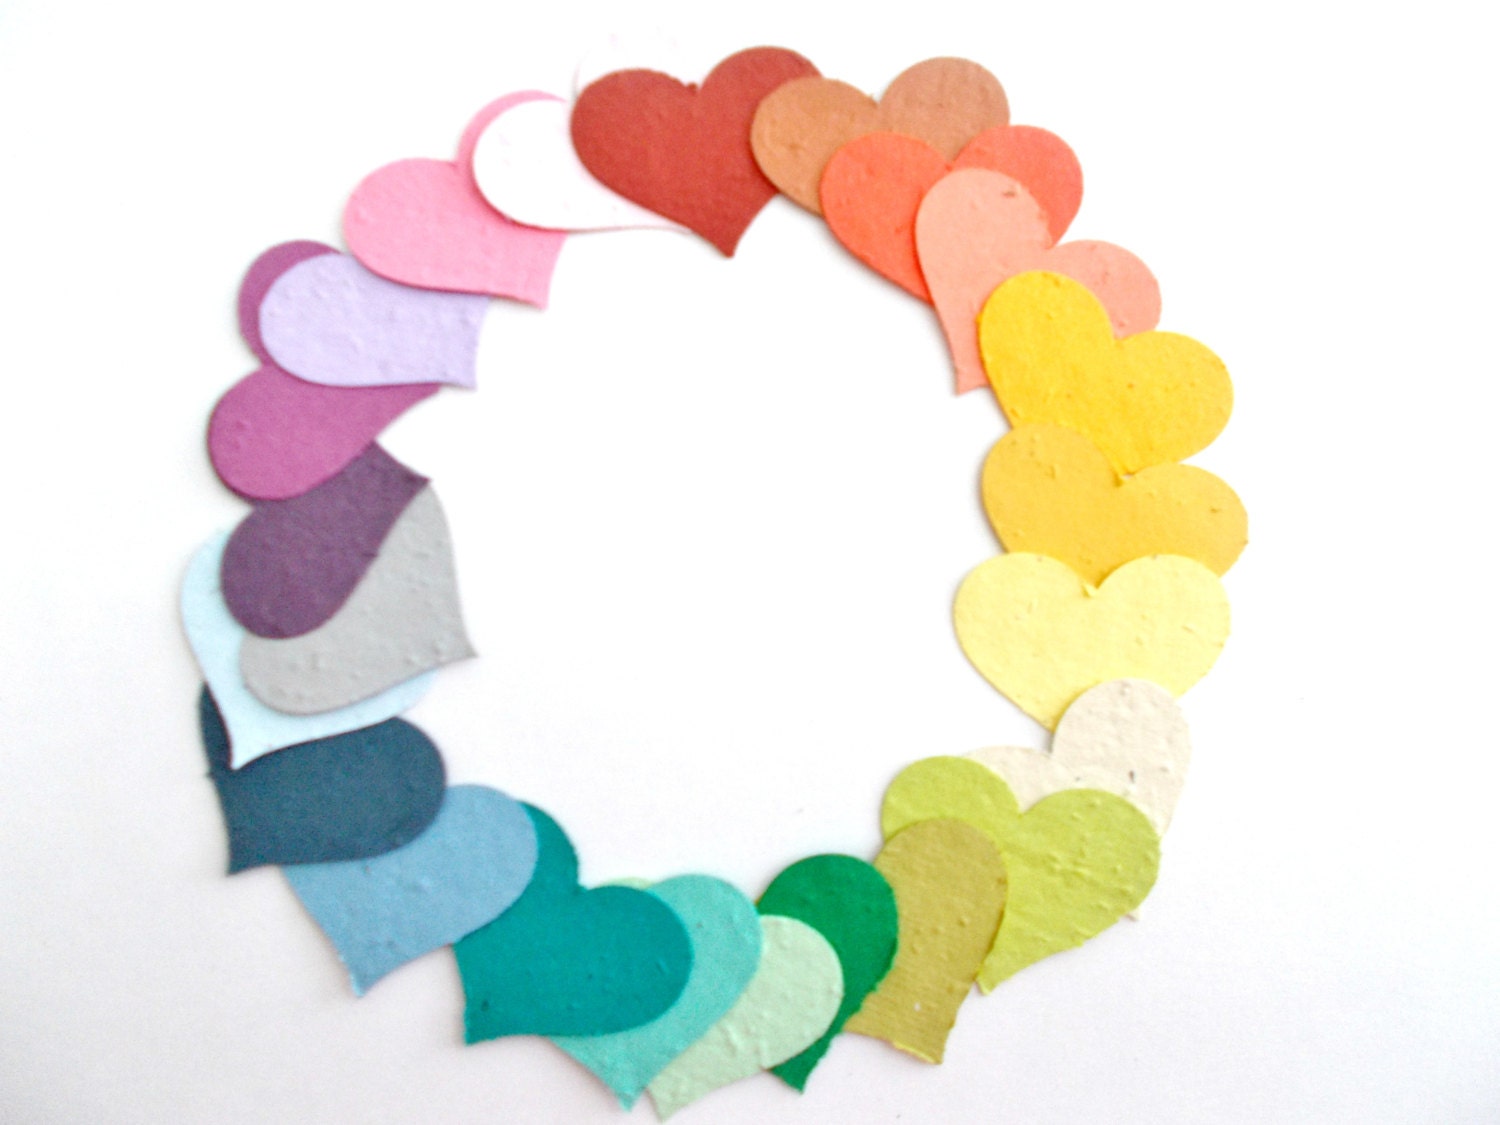 100 Large Heart Wedding Confetti - Eco Friendly Plantable Paper Hearts for Wedding, Shower and Party Decoration - Your Choice of Colors